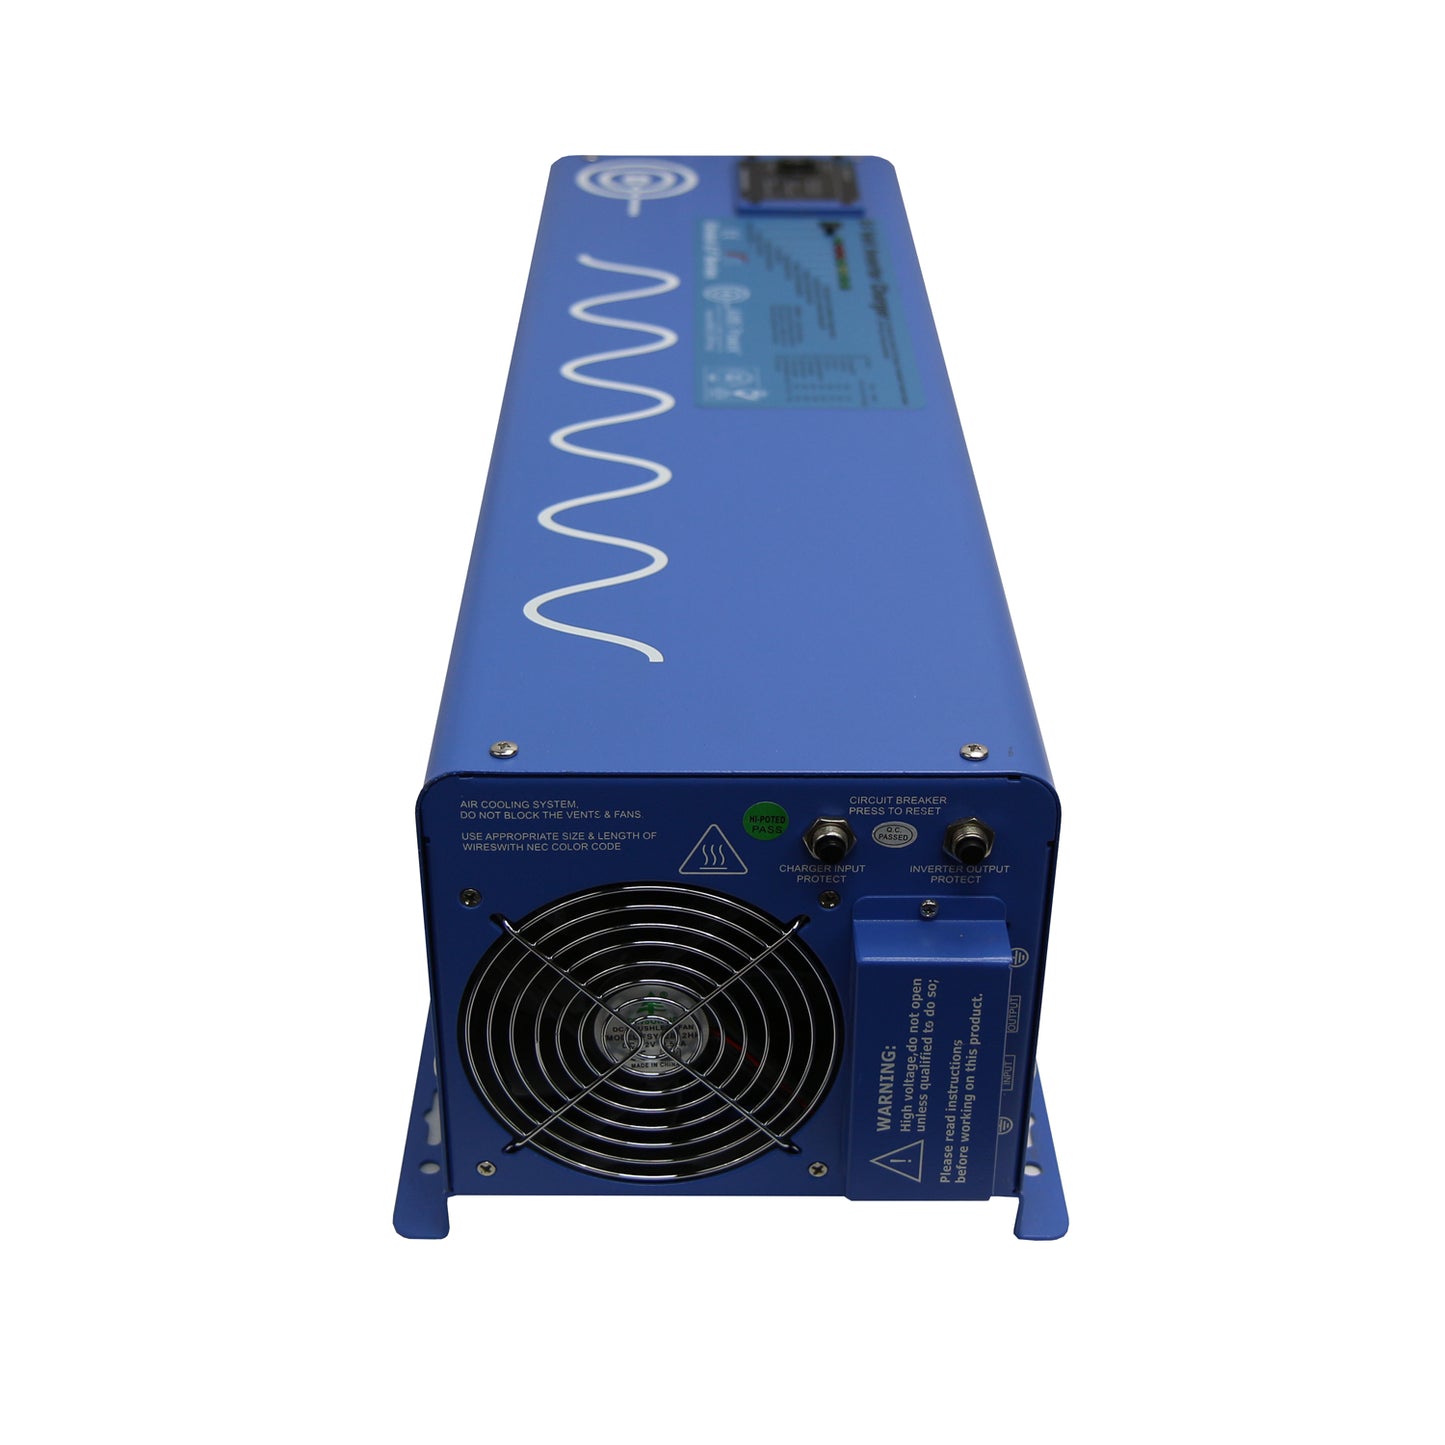 AIMS Power Pure Sine Inverter Charger | Split Phase 120/240VAC Output | 6000 Watts | 48 Volts